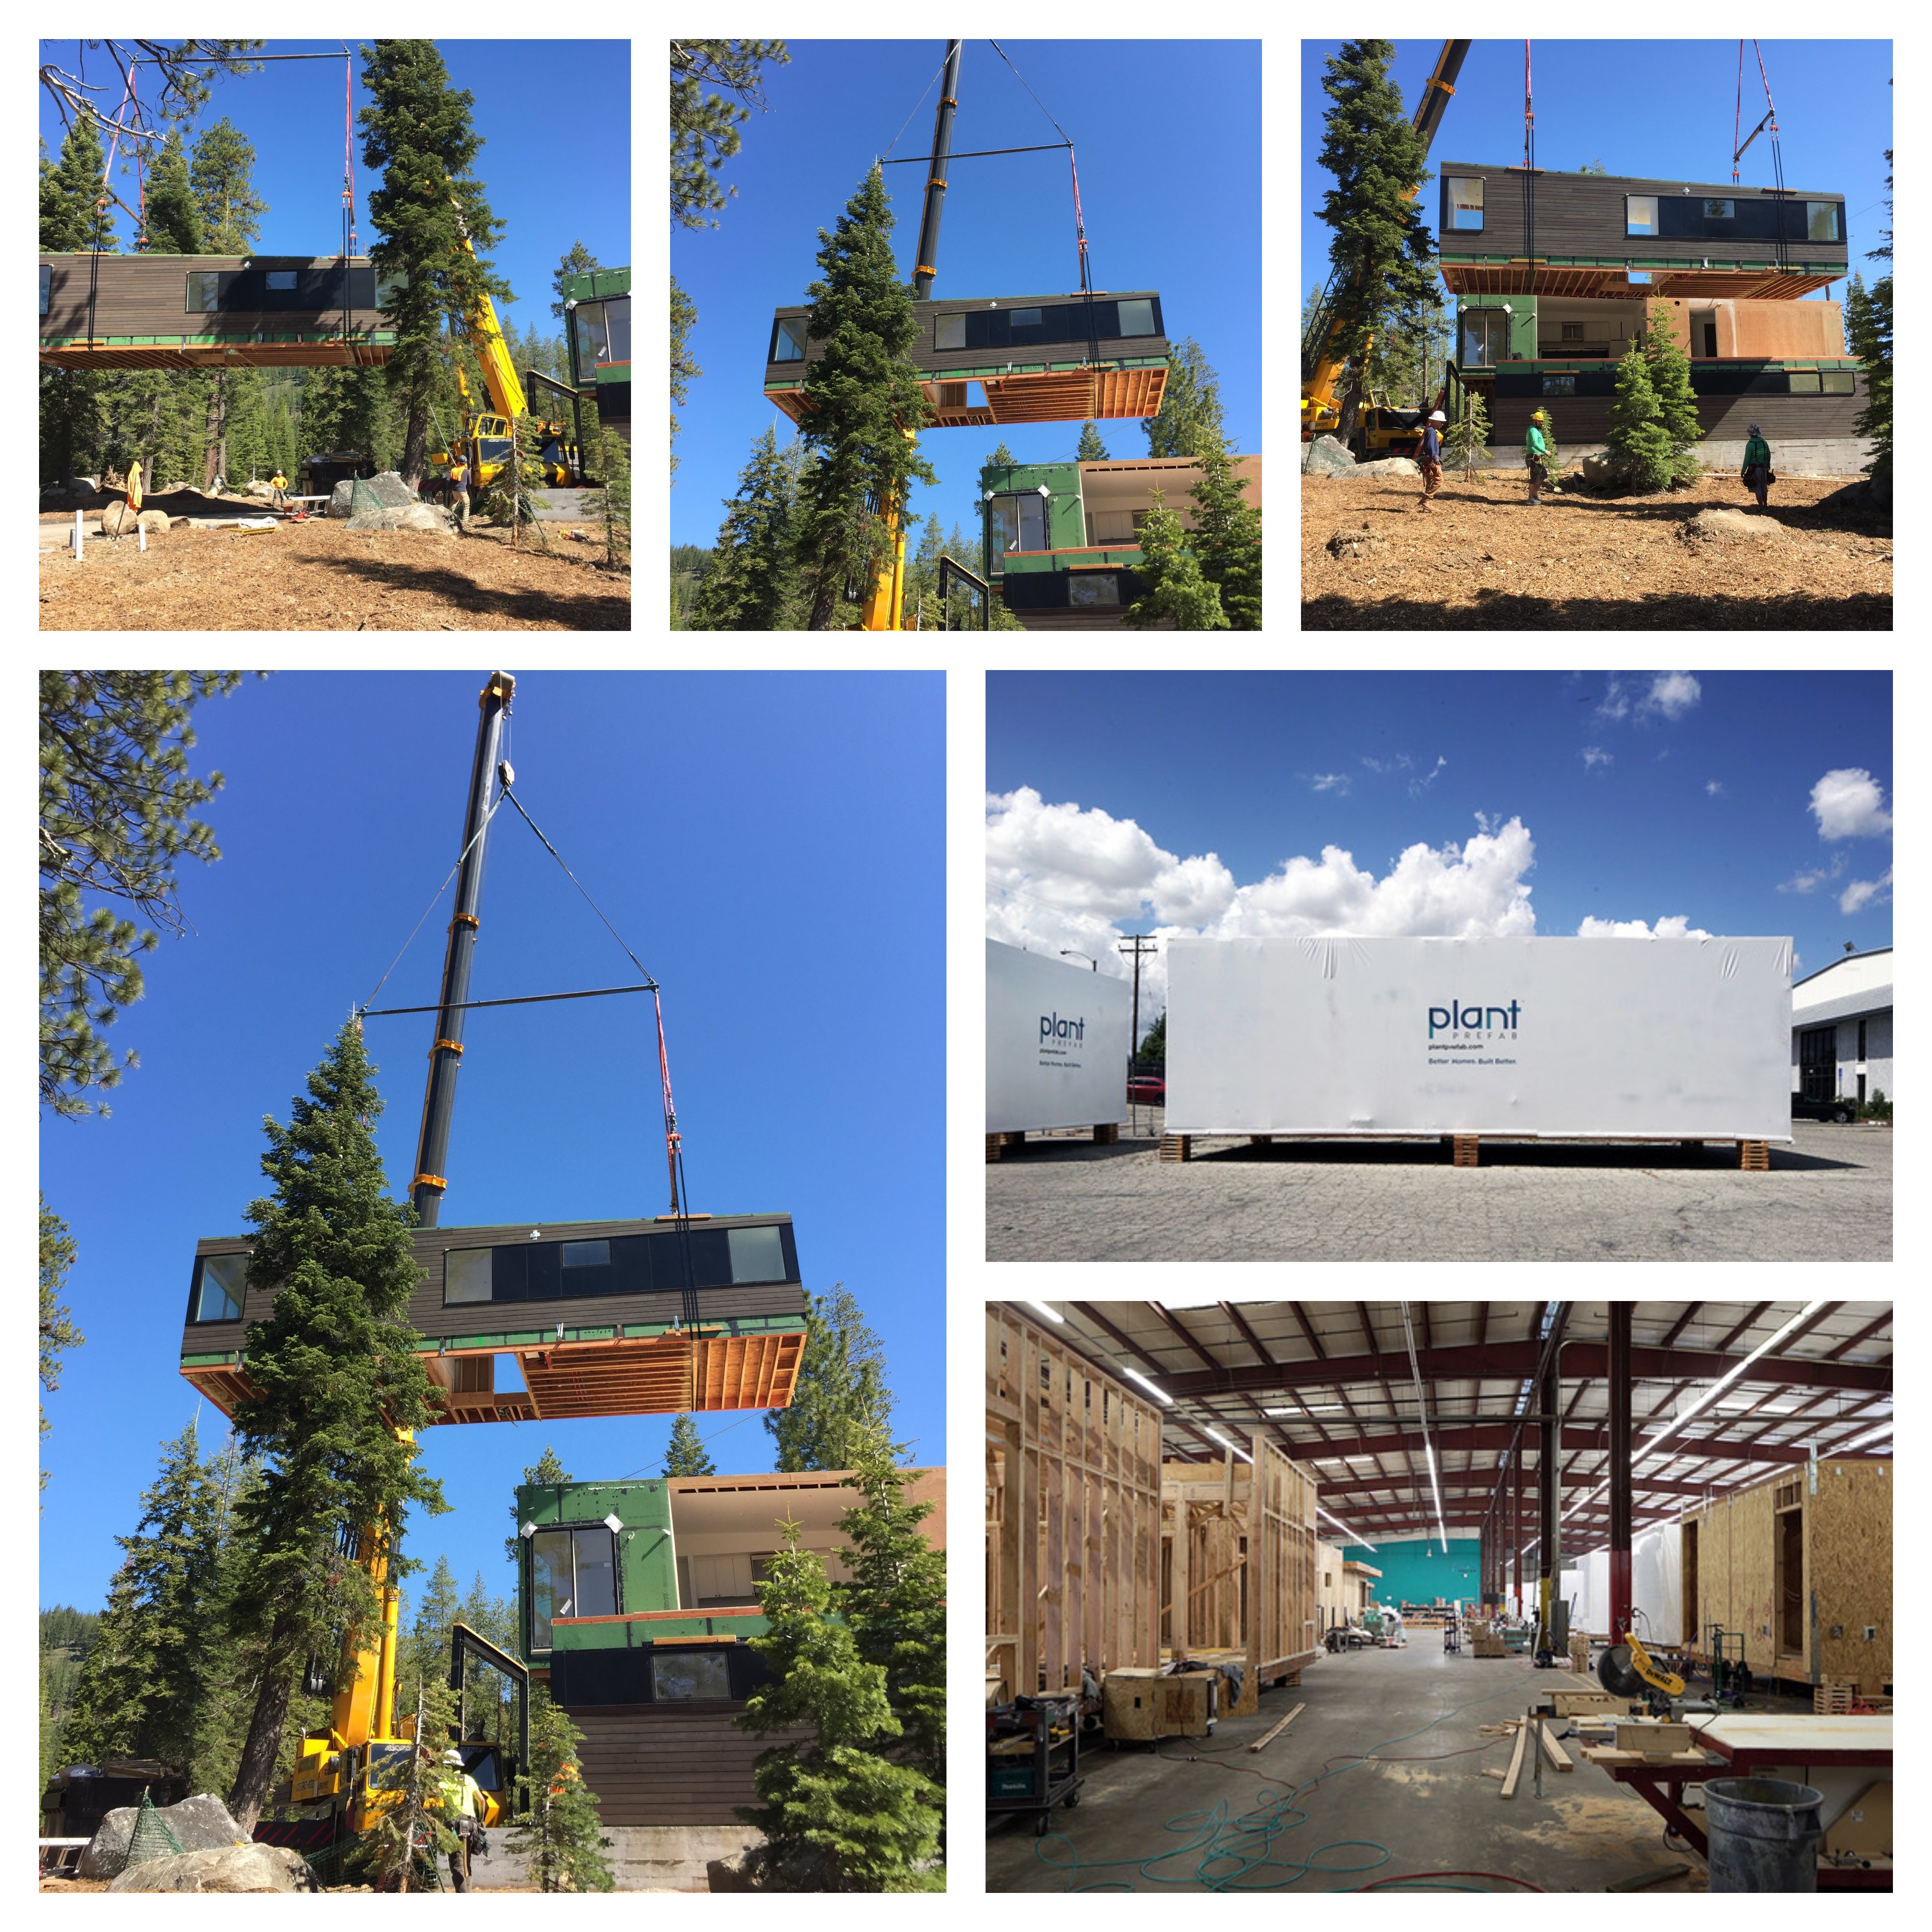 Plant Prefab modular units are lifted into place at The Palisades at Squaw Valley community. Photo courtesy Brown Studio